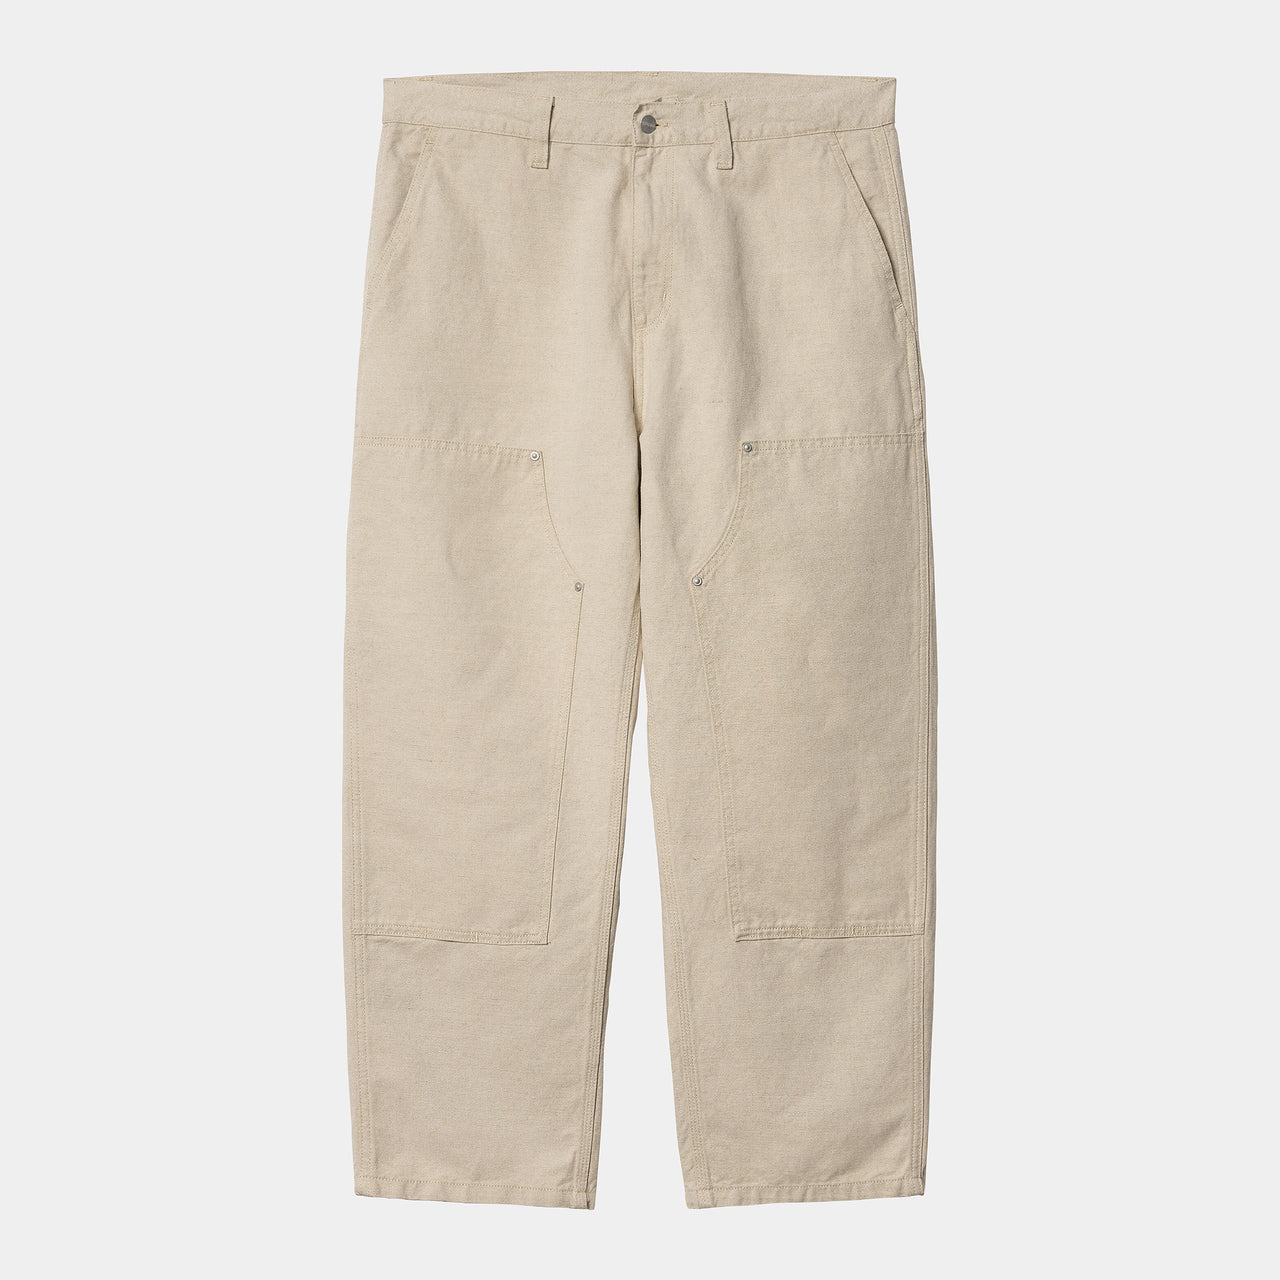 WALTER DOUBLE KNEE PANT BY CARHARTT WIP